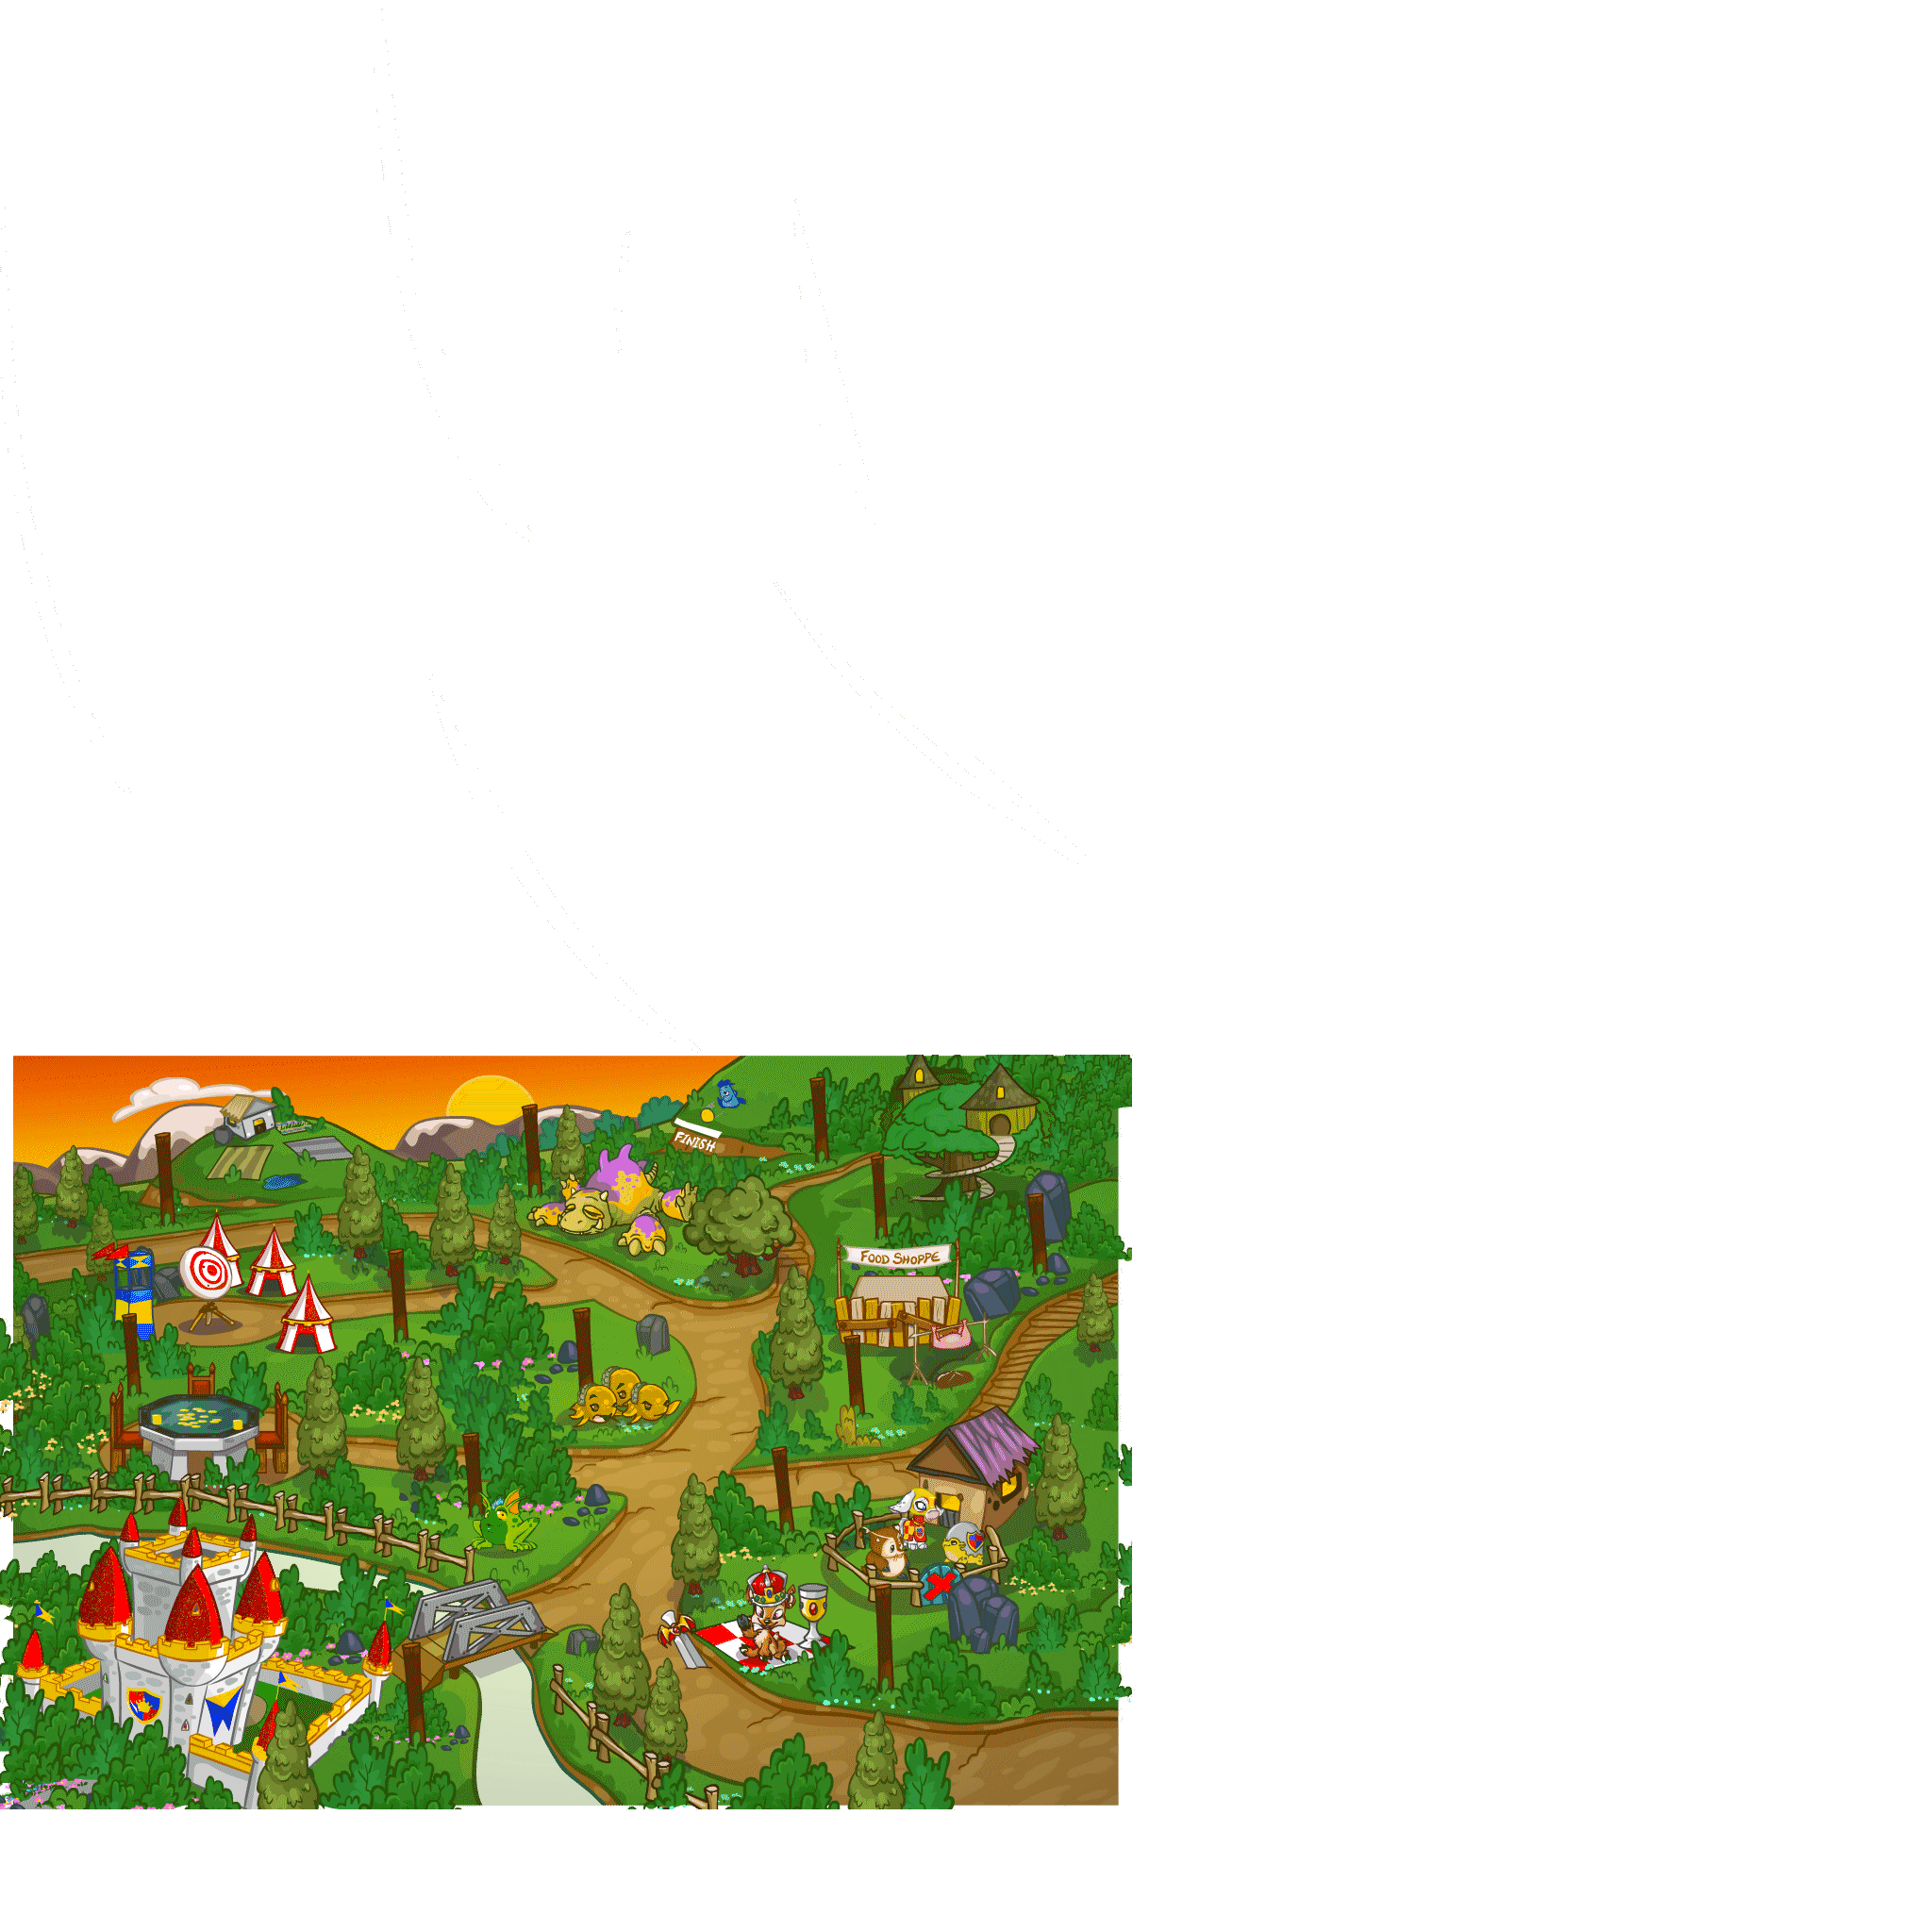 https://images.neopets.com/maps/medieval/meridell/images/meridell_2022_html5_canvas_02b_atlas_1.png